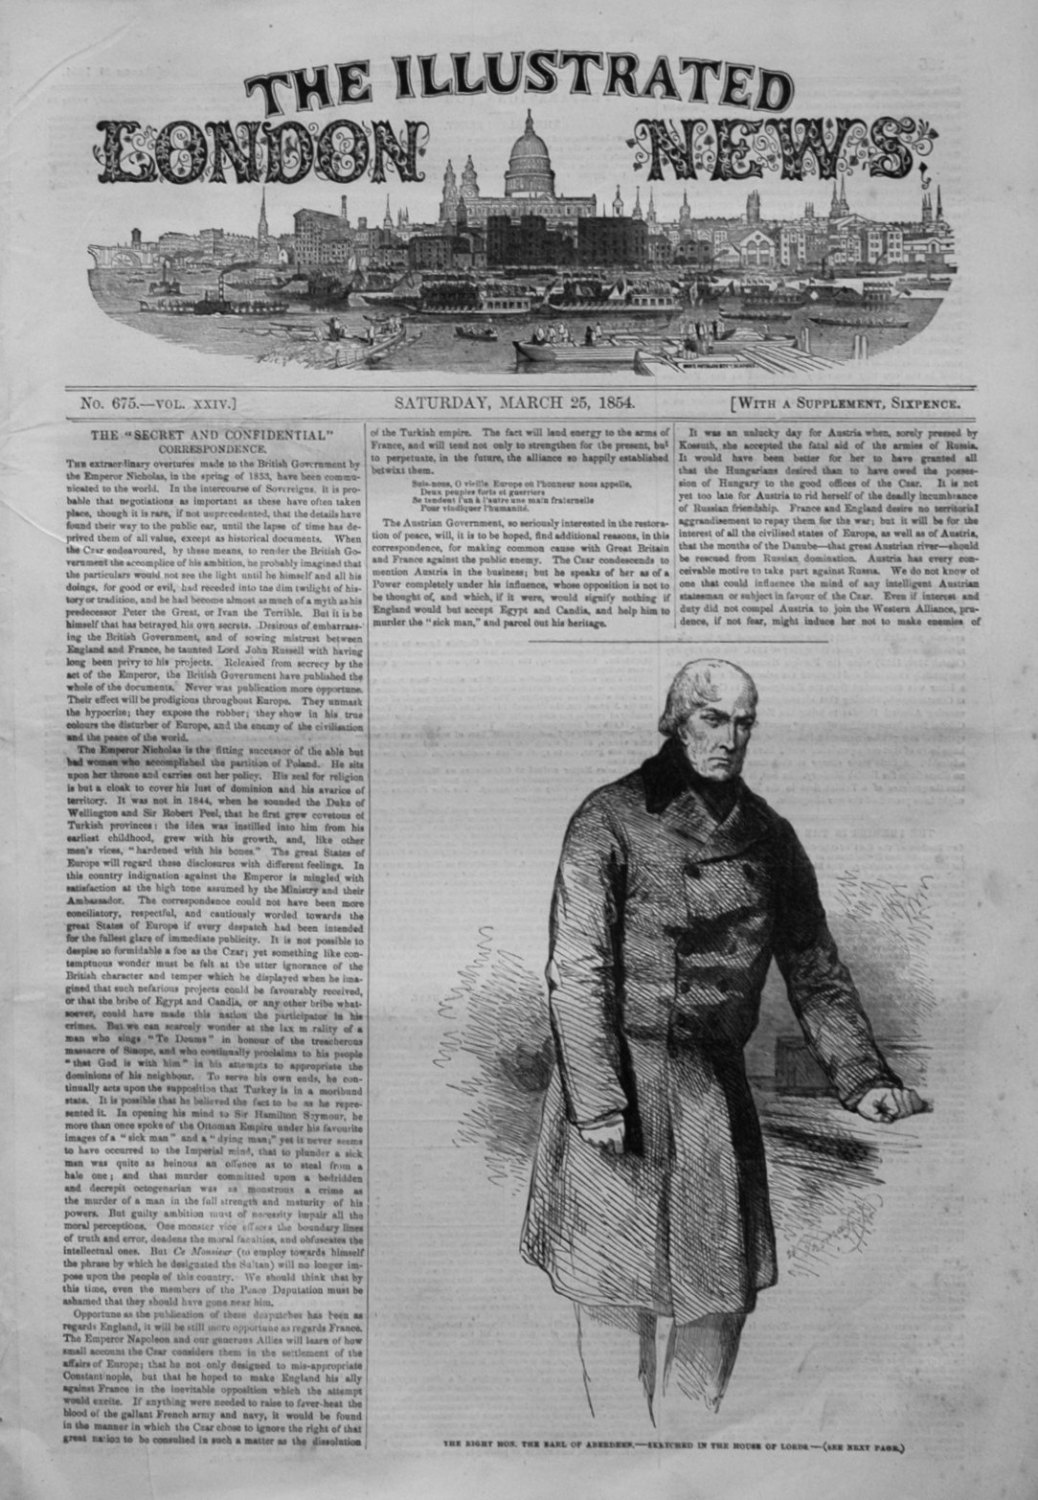 Illustrated London News March 25th 1854.